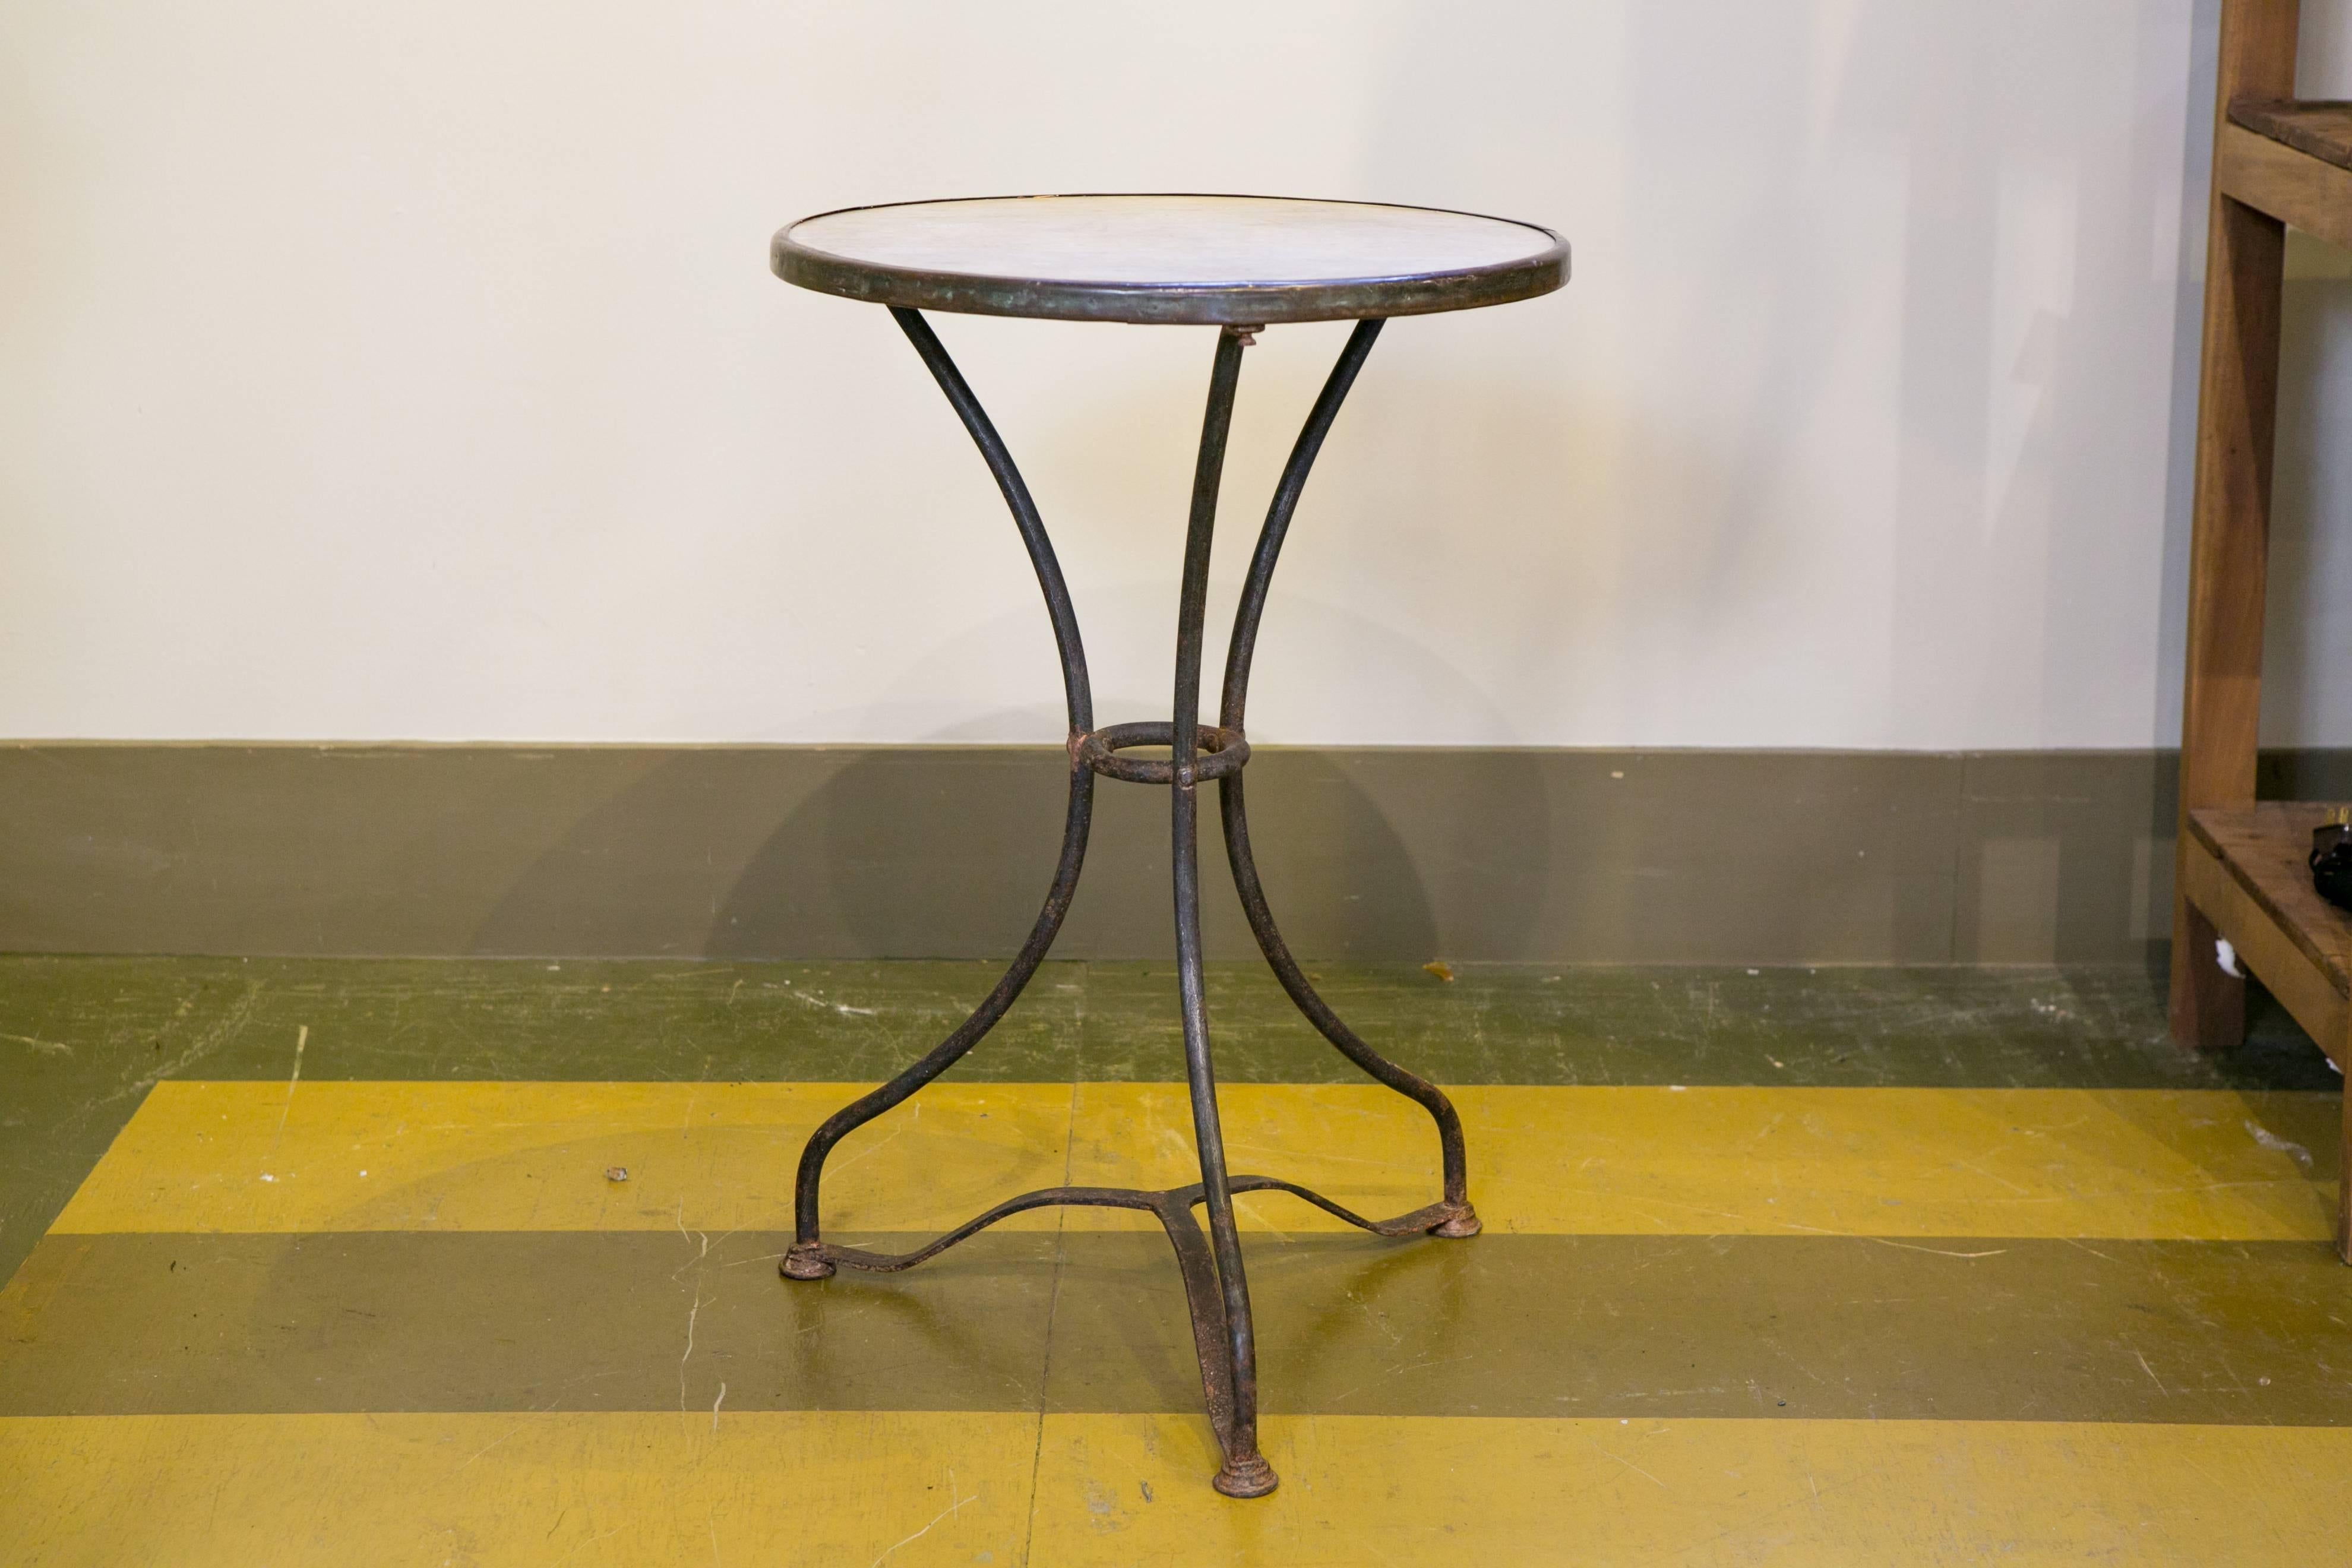 Antique French gueridon table with marble top, brass band and iron base. Classic style with great proportions.
From France, circa 1900.